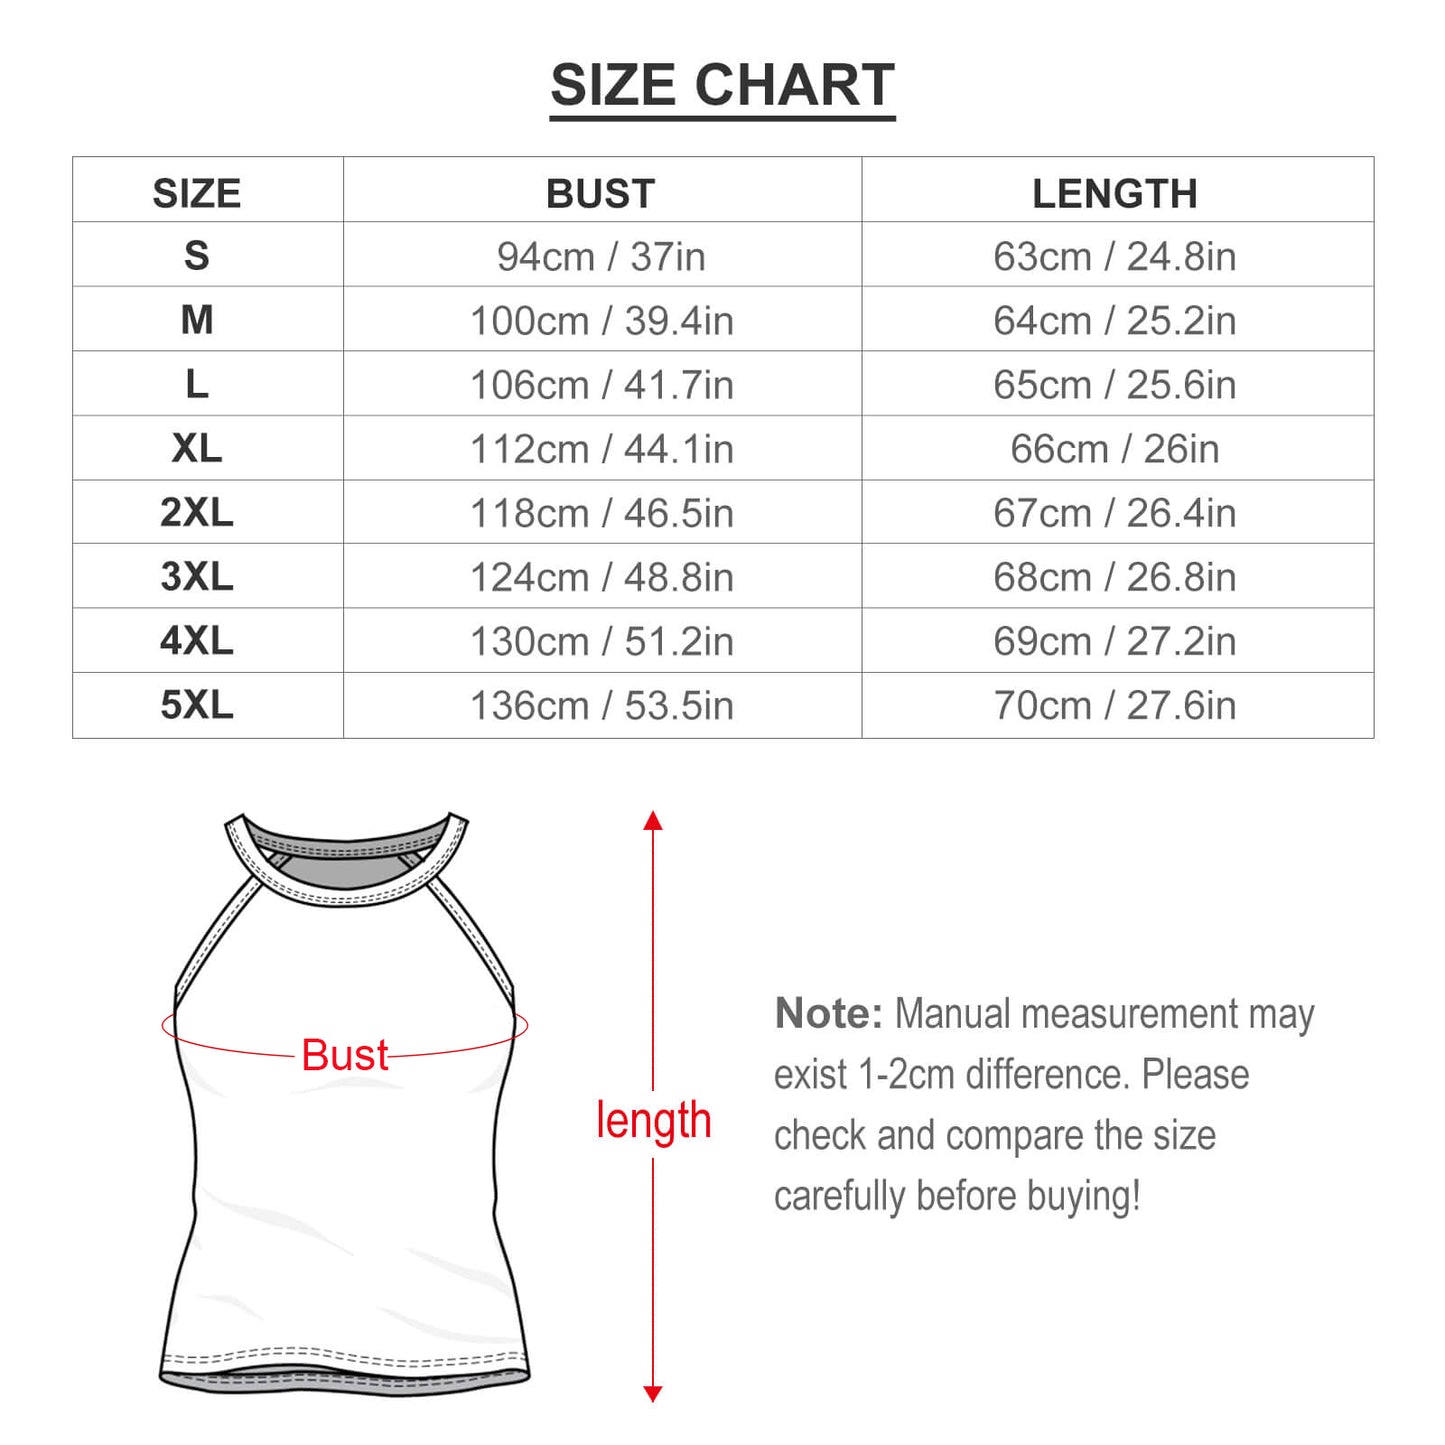 The Magical Gang Women's Round-Neck Vest Tank Top